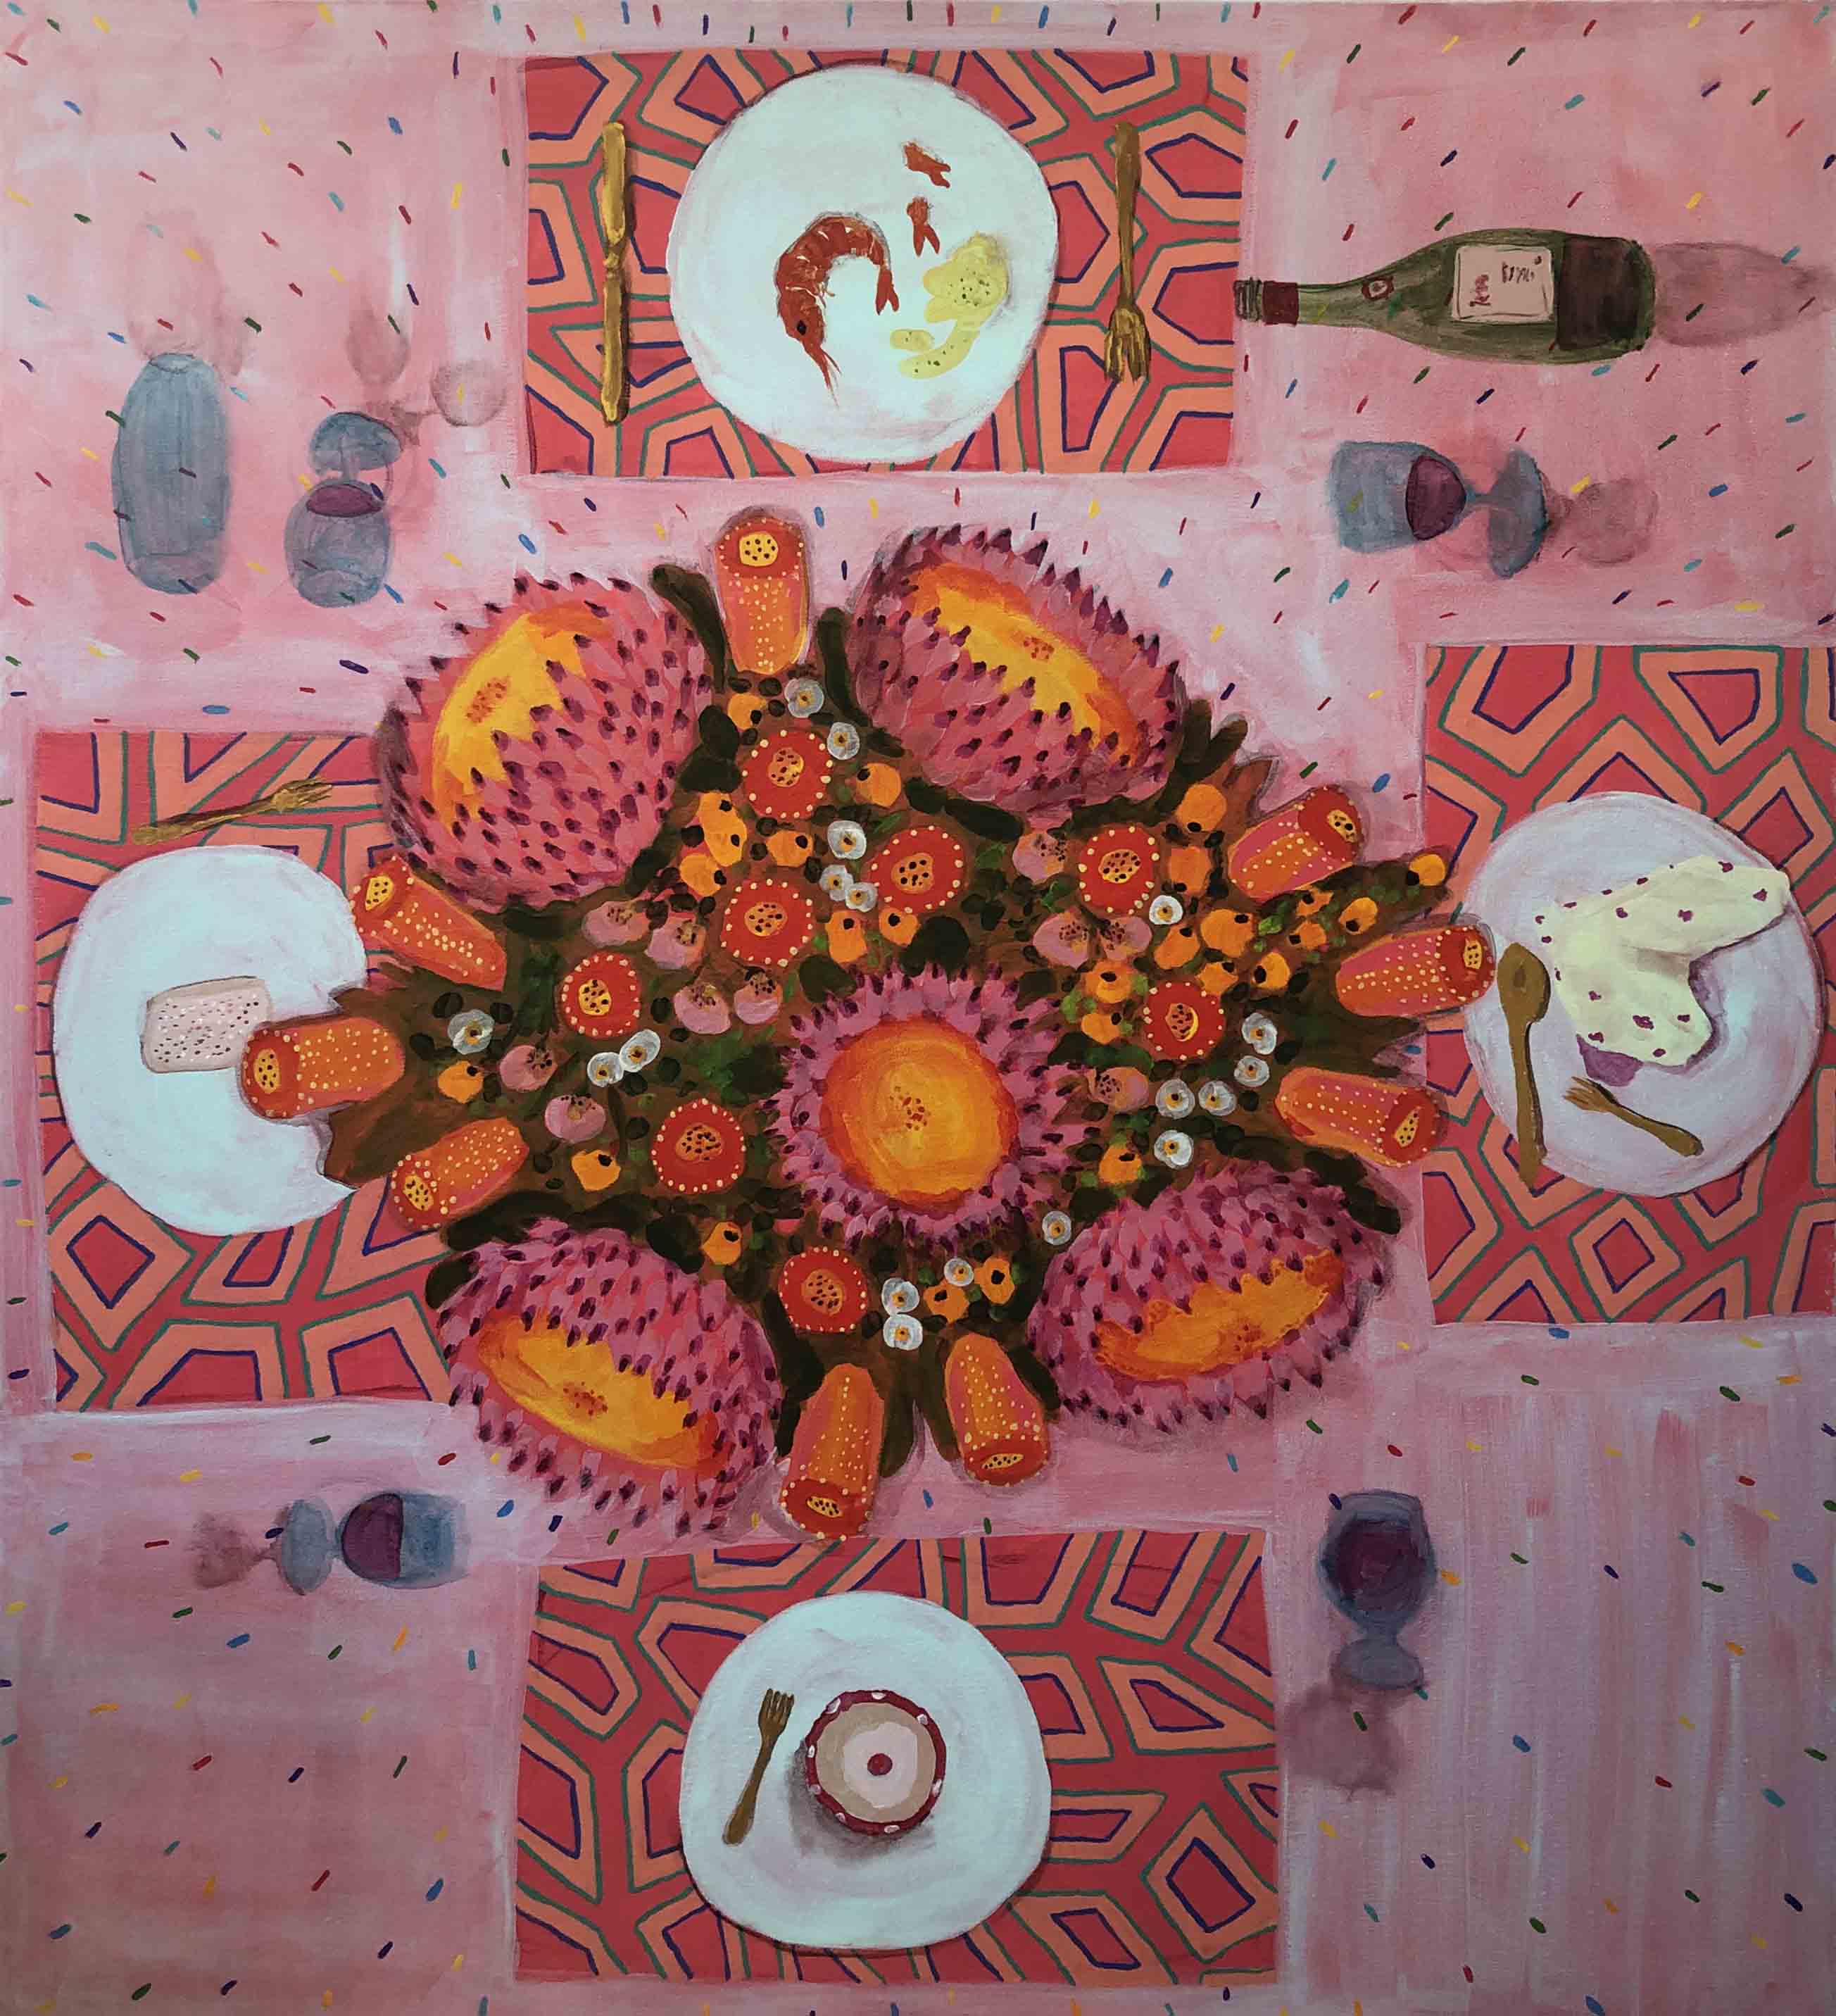 Wine, Prawns, Cake and Flowers (sold)